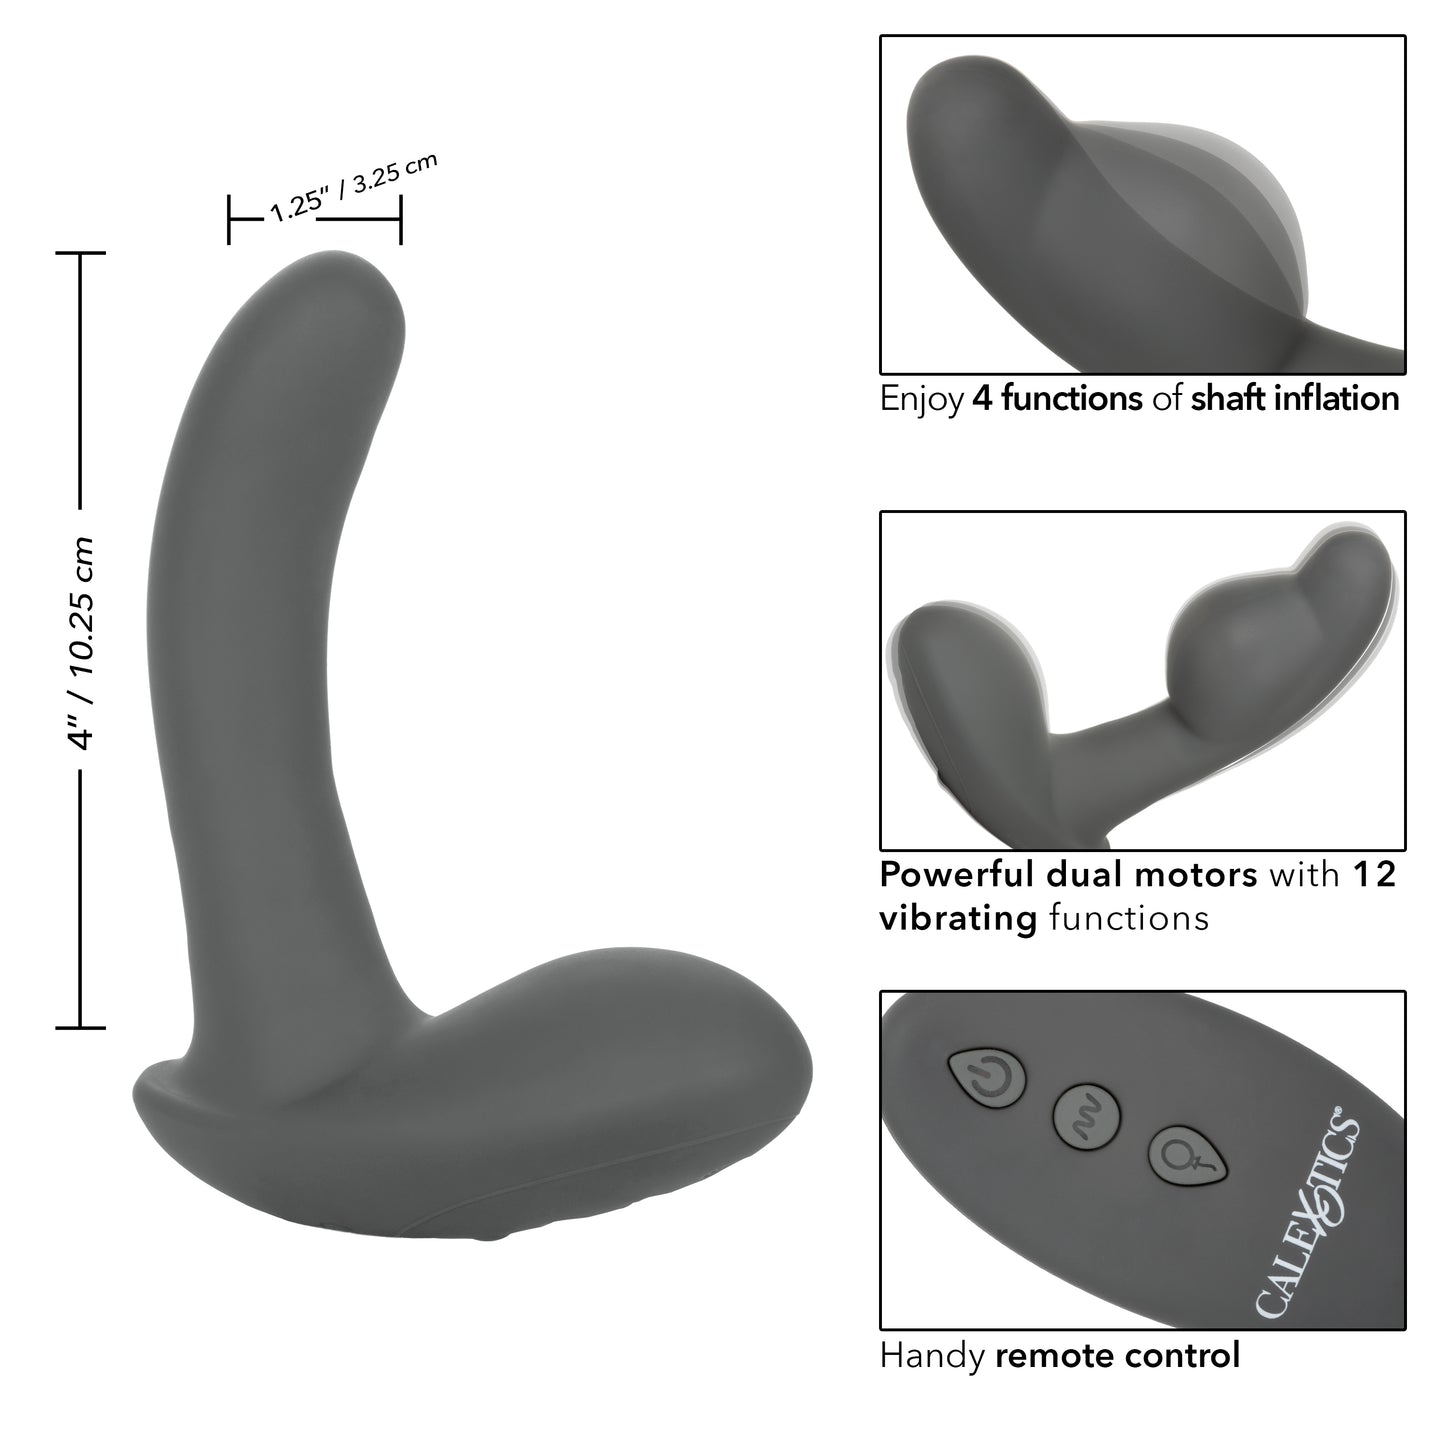 Eclipse™ Remote Control Inflatable Probe